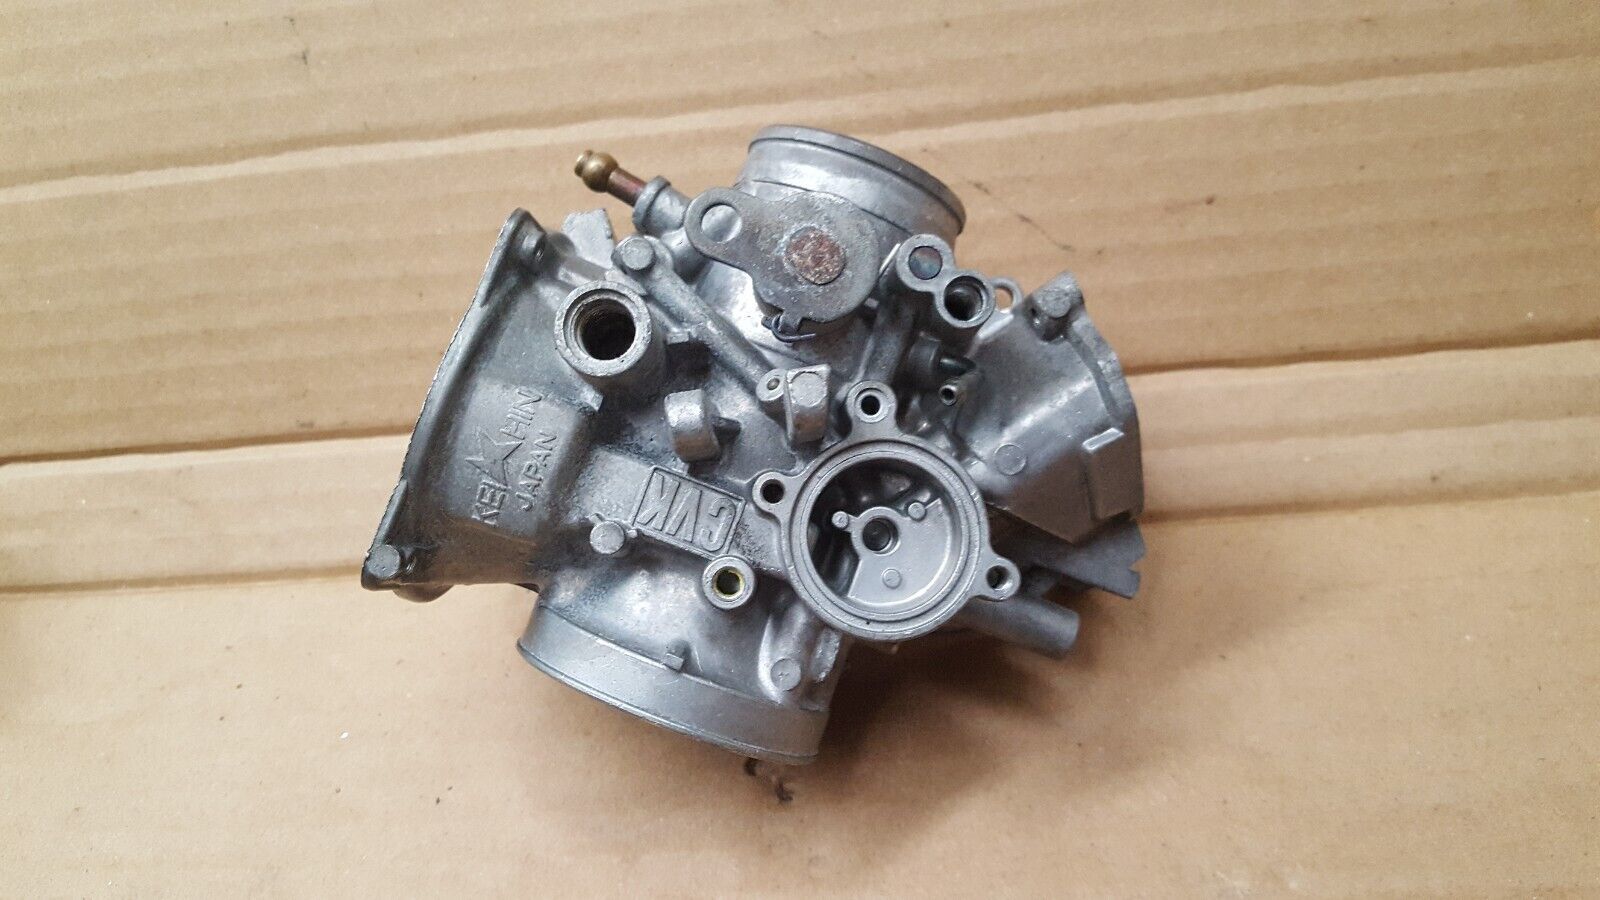 Primary image for 87-99 Kawasaki VN1500 A VULCAN 88 96-97 VN1500C right carburetor body front